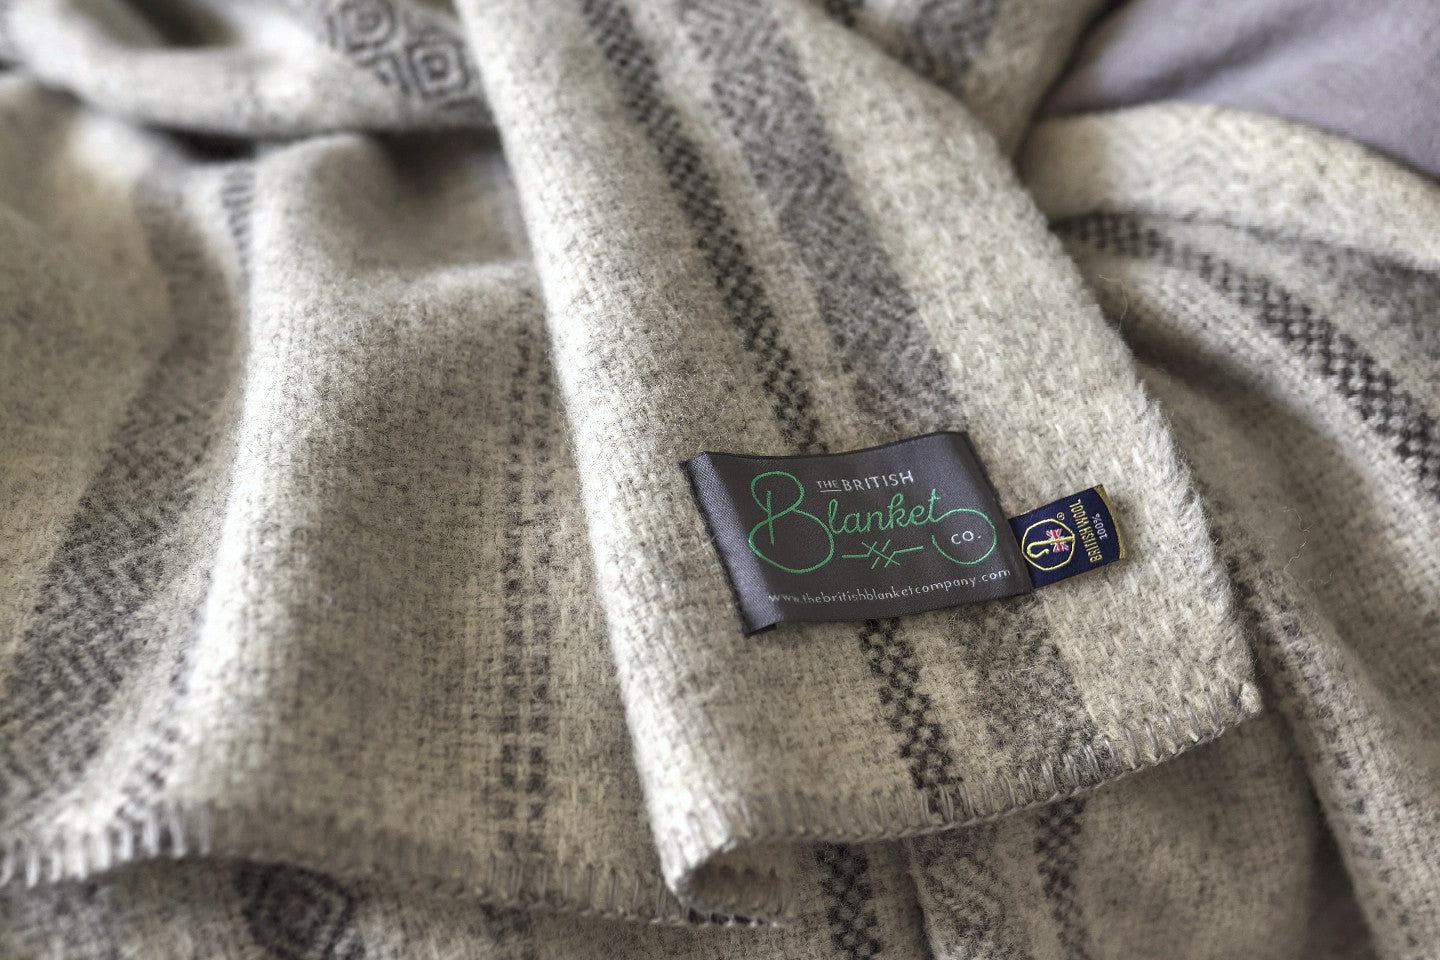 British Wool Blanket Collection – The British Blanket Company